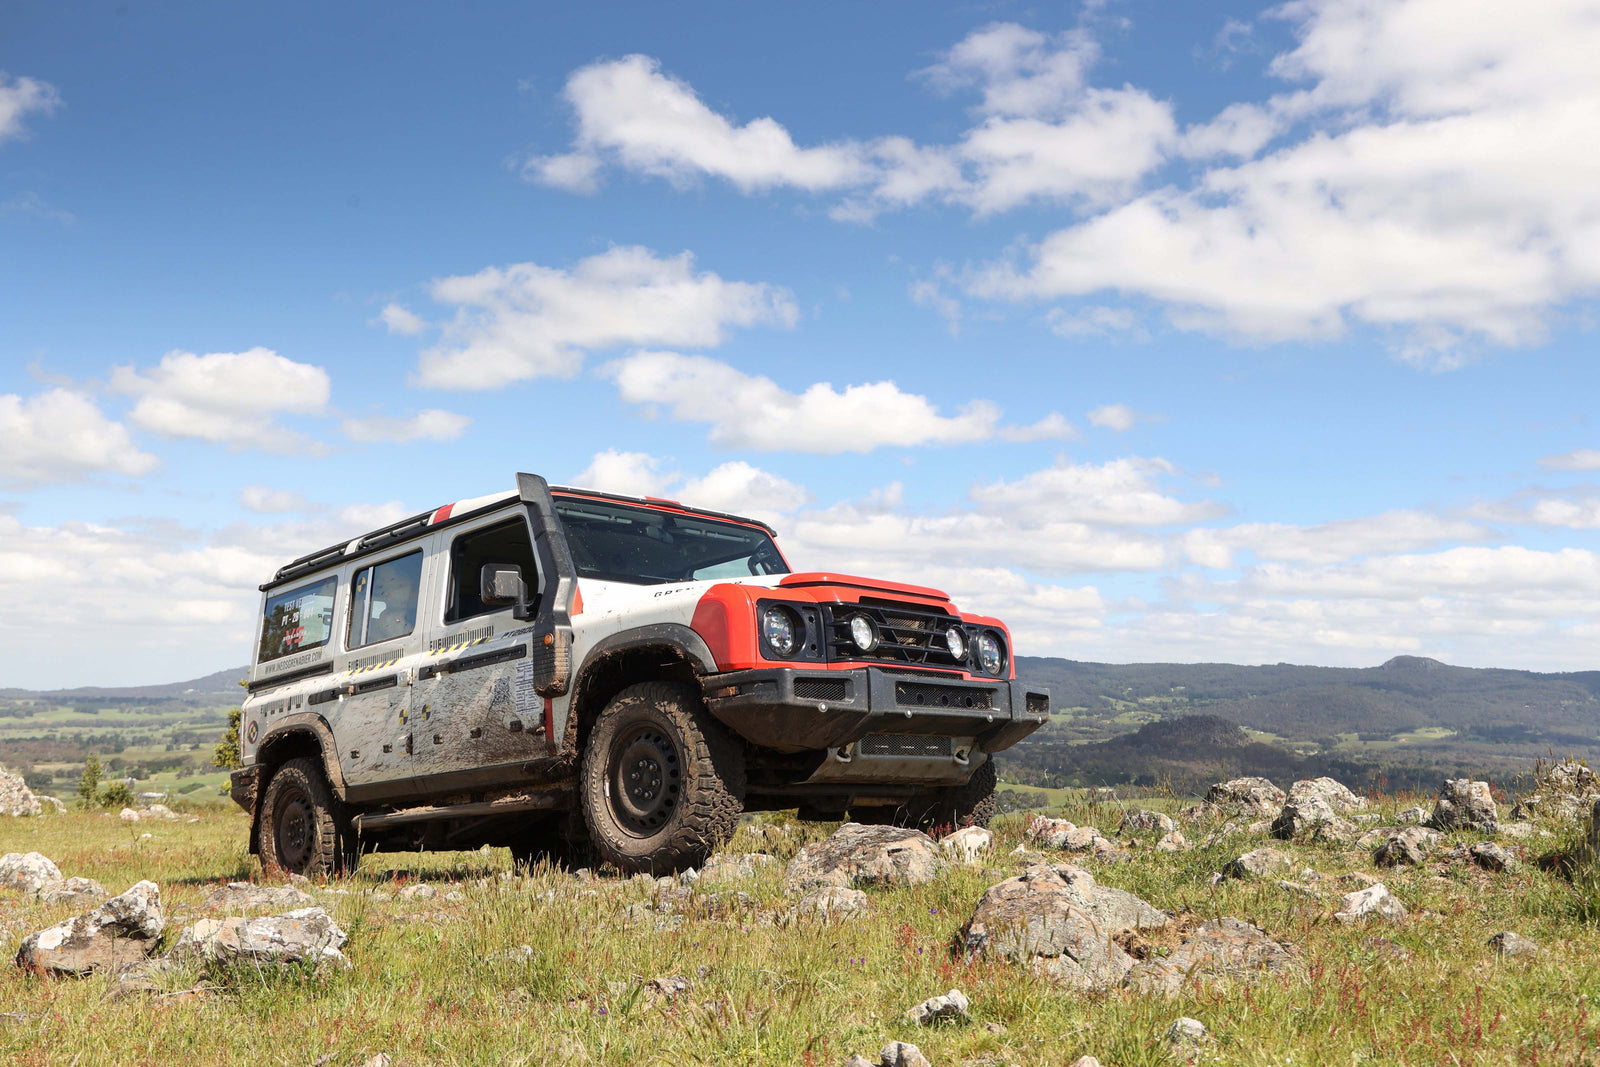 PREVIEW: INEOS GRENADIER 4X4 - Will it tow a caravan?